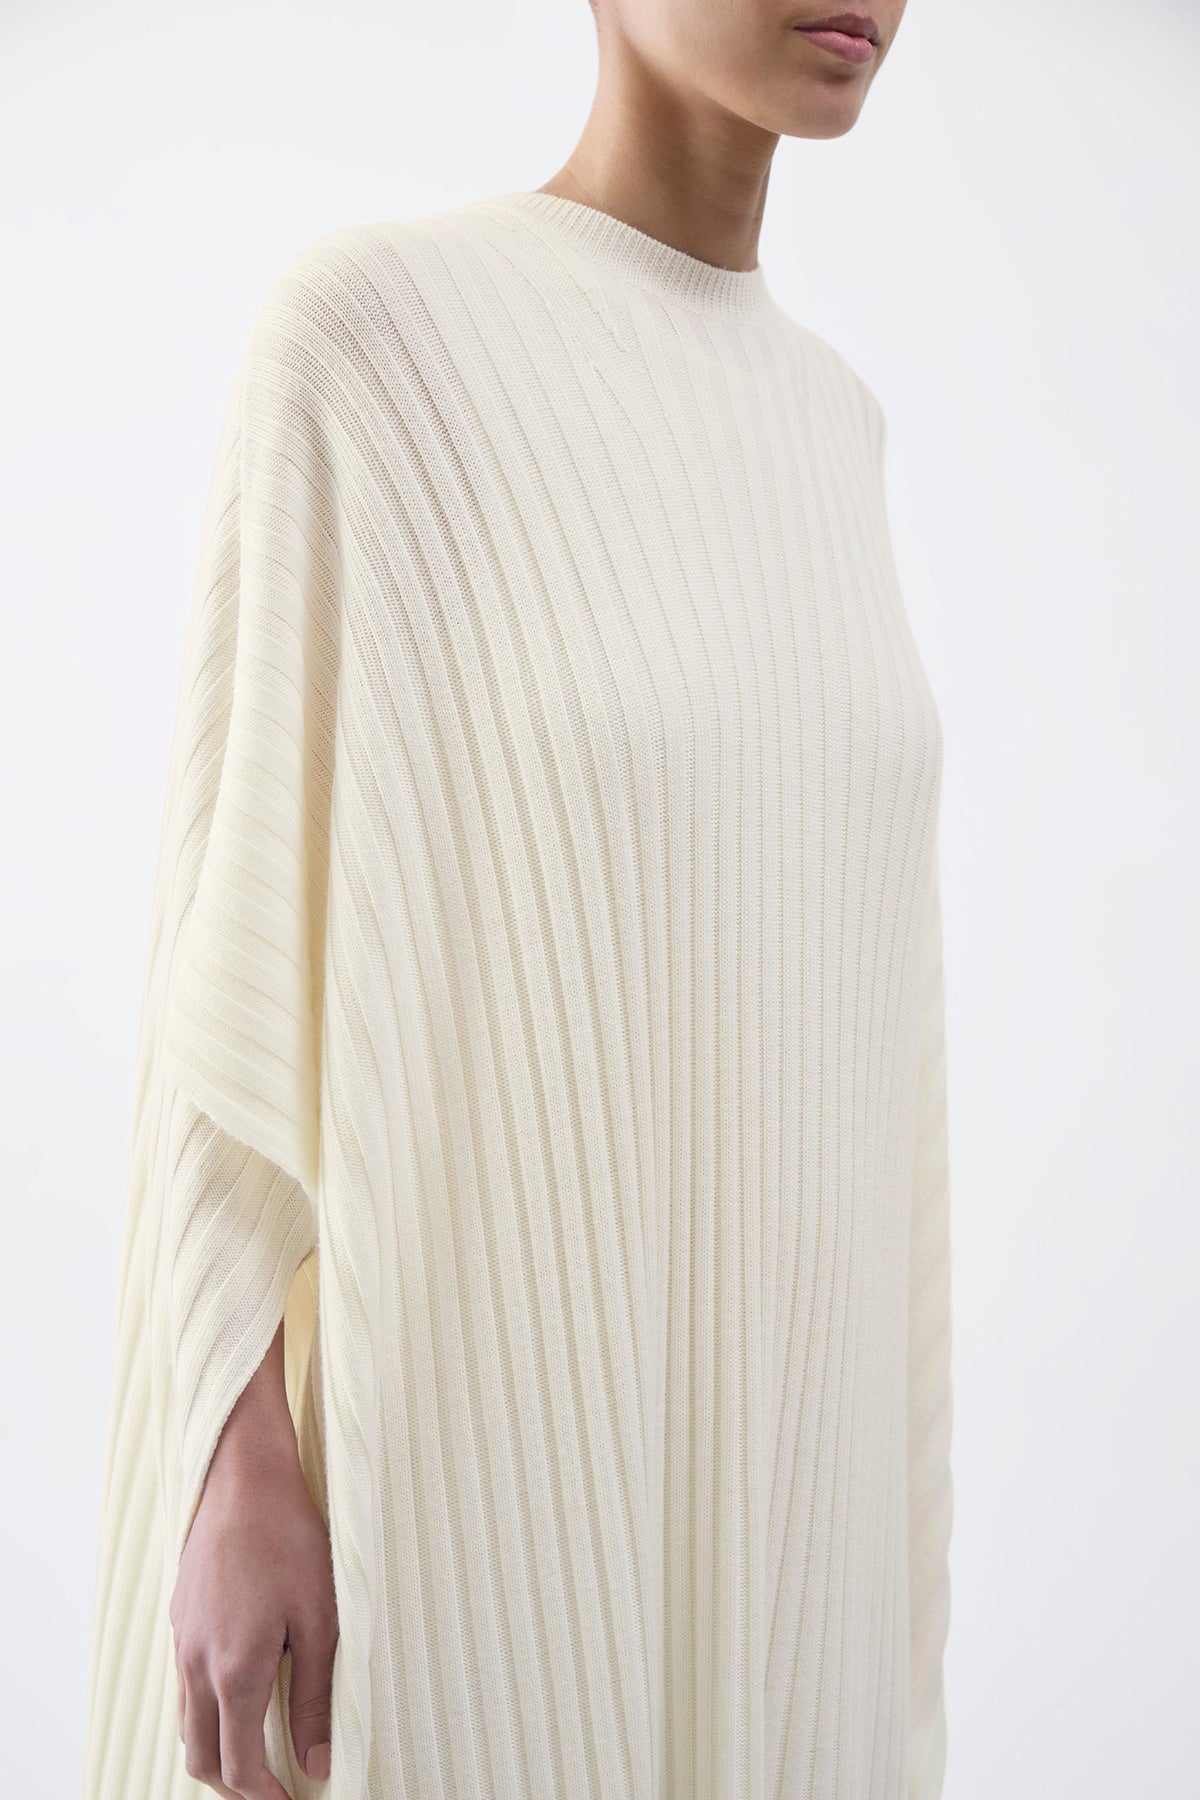 Taos Knit Poncho in Ivory Merino Wool Cashmere